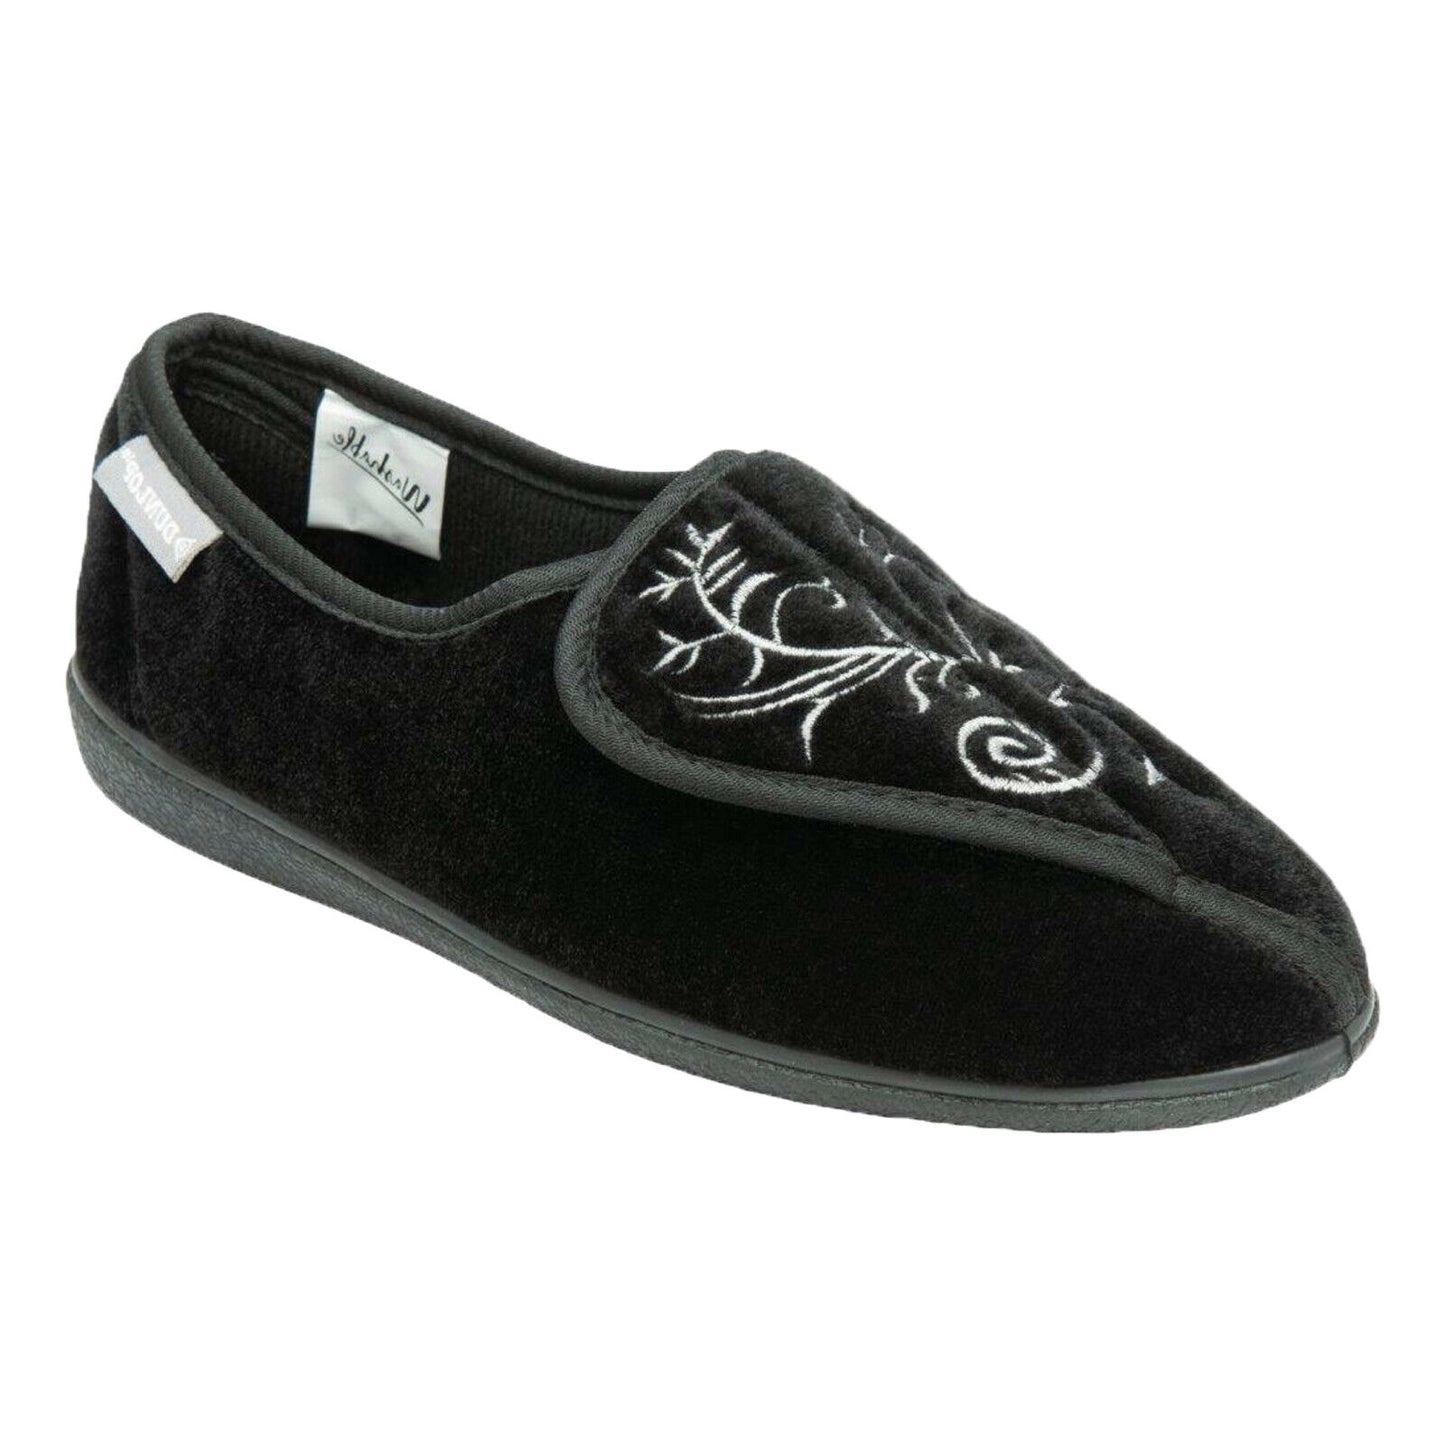 Ladies Dunlop Touch Fasten Memory Foam Orthopaedic Shoes Comfy Lounge Slippers